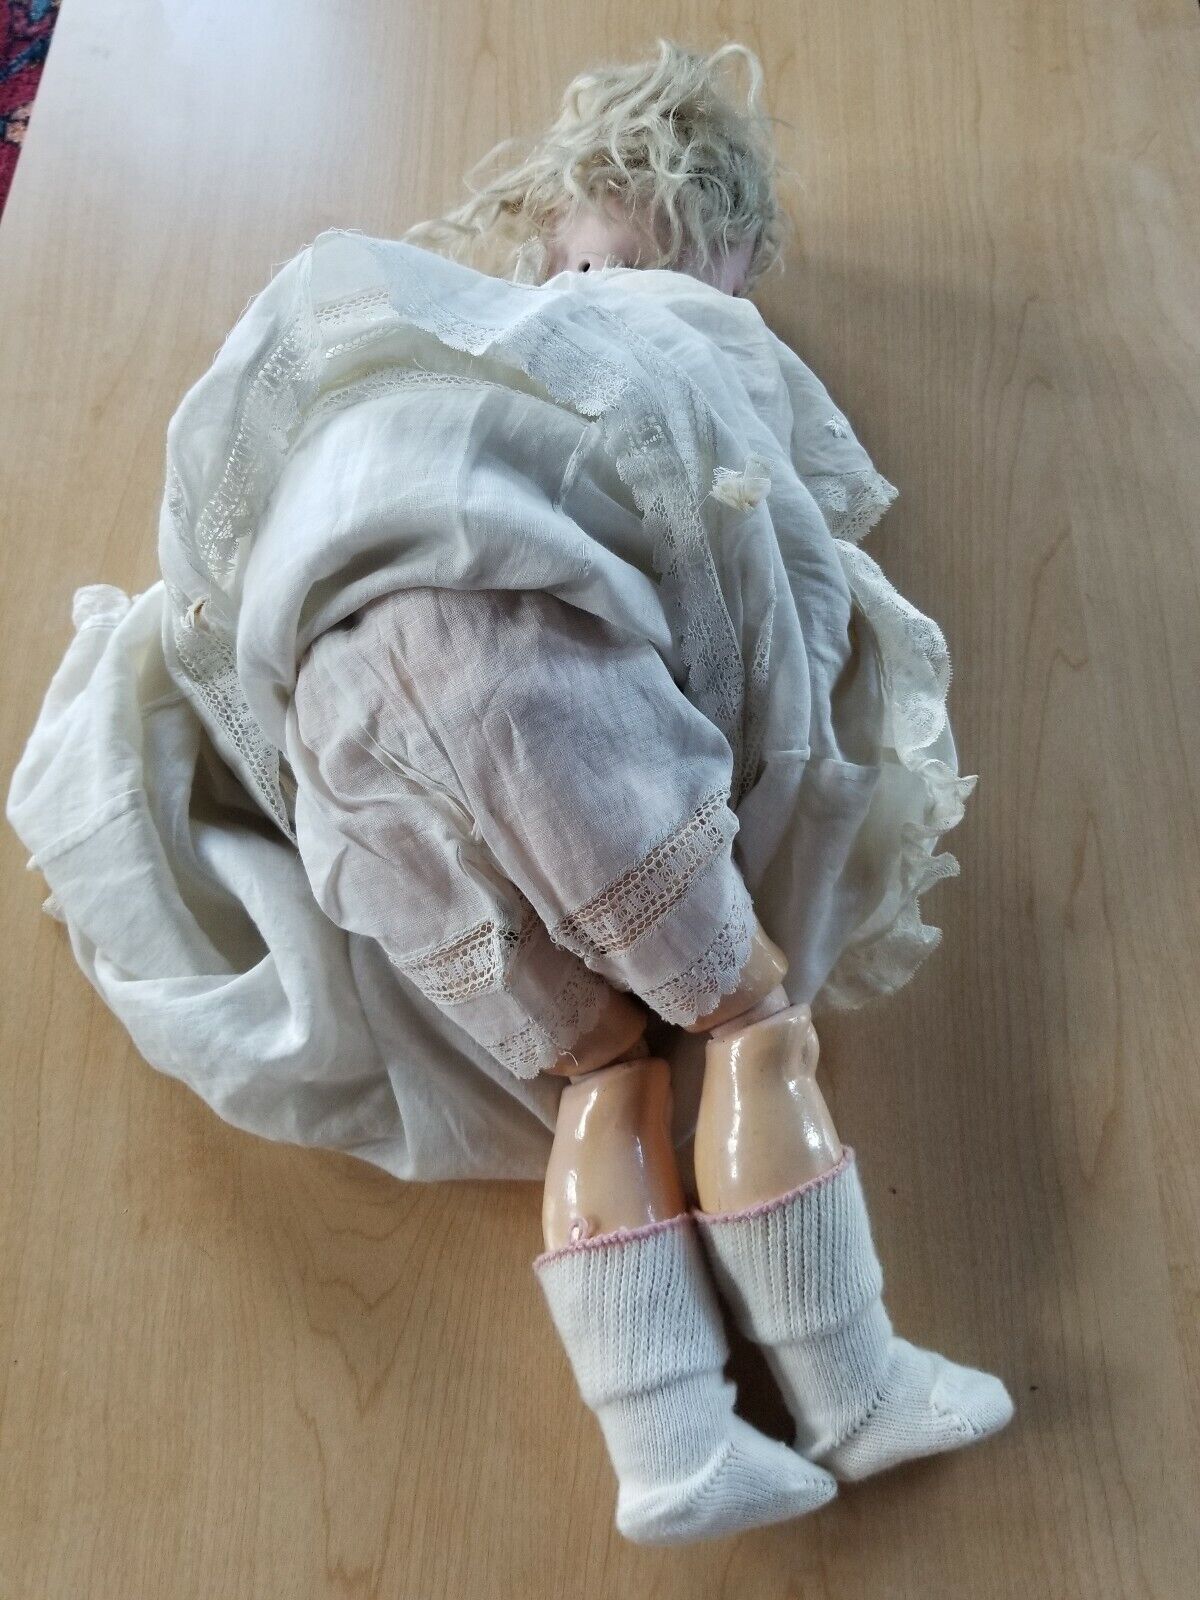 1870-1925 Simon & Halbig 21" German Bisque Doll from Collection with provenance